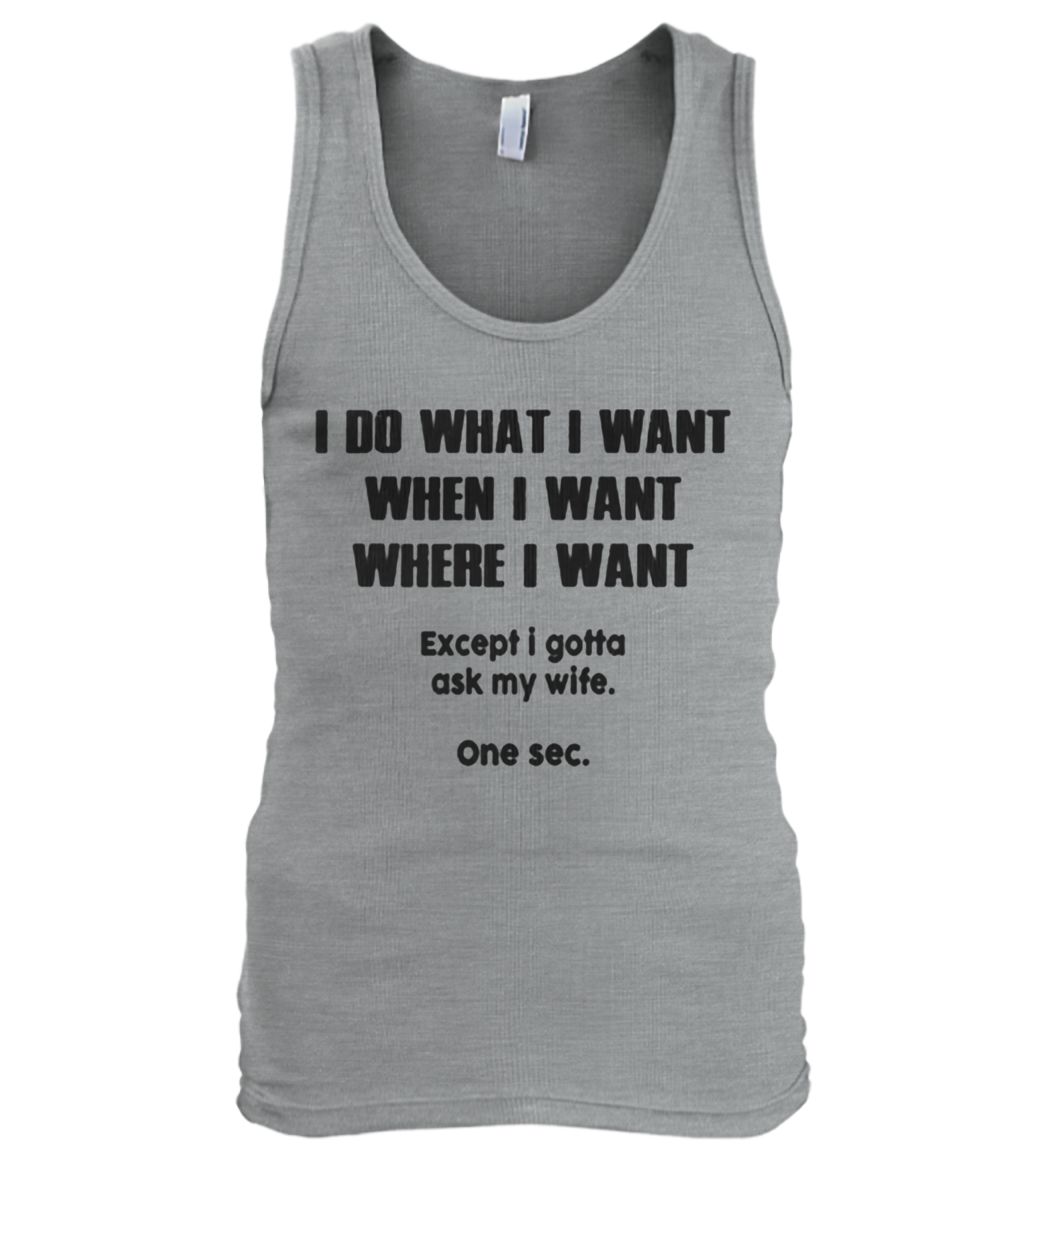 I do what when where I want except I gotta ask my wife women's tank top